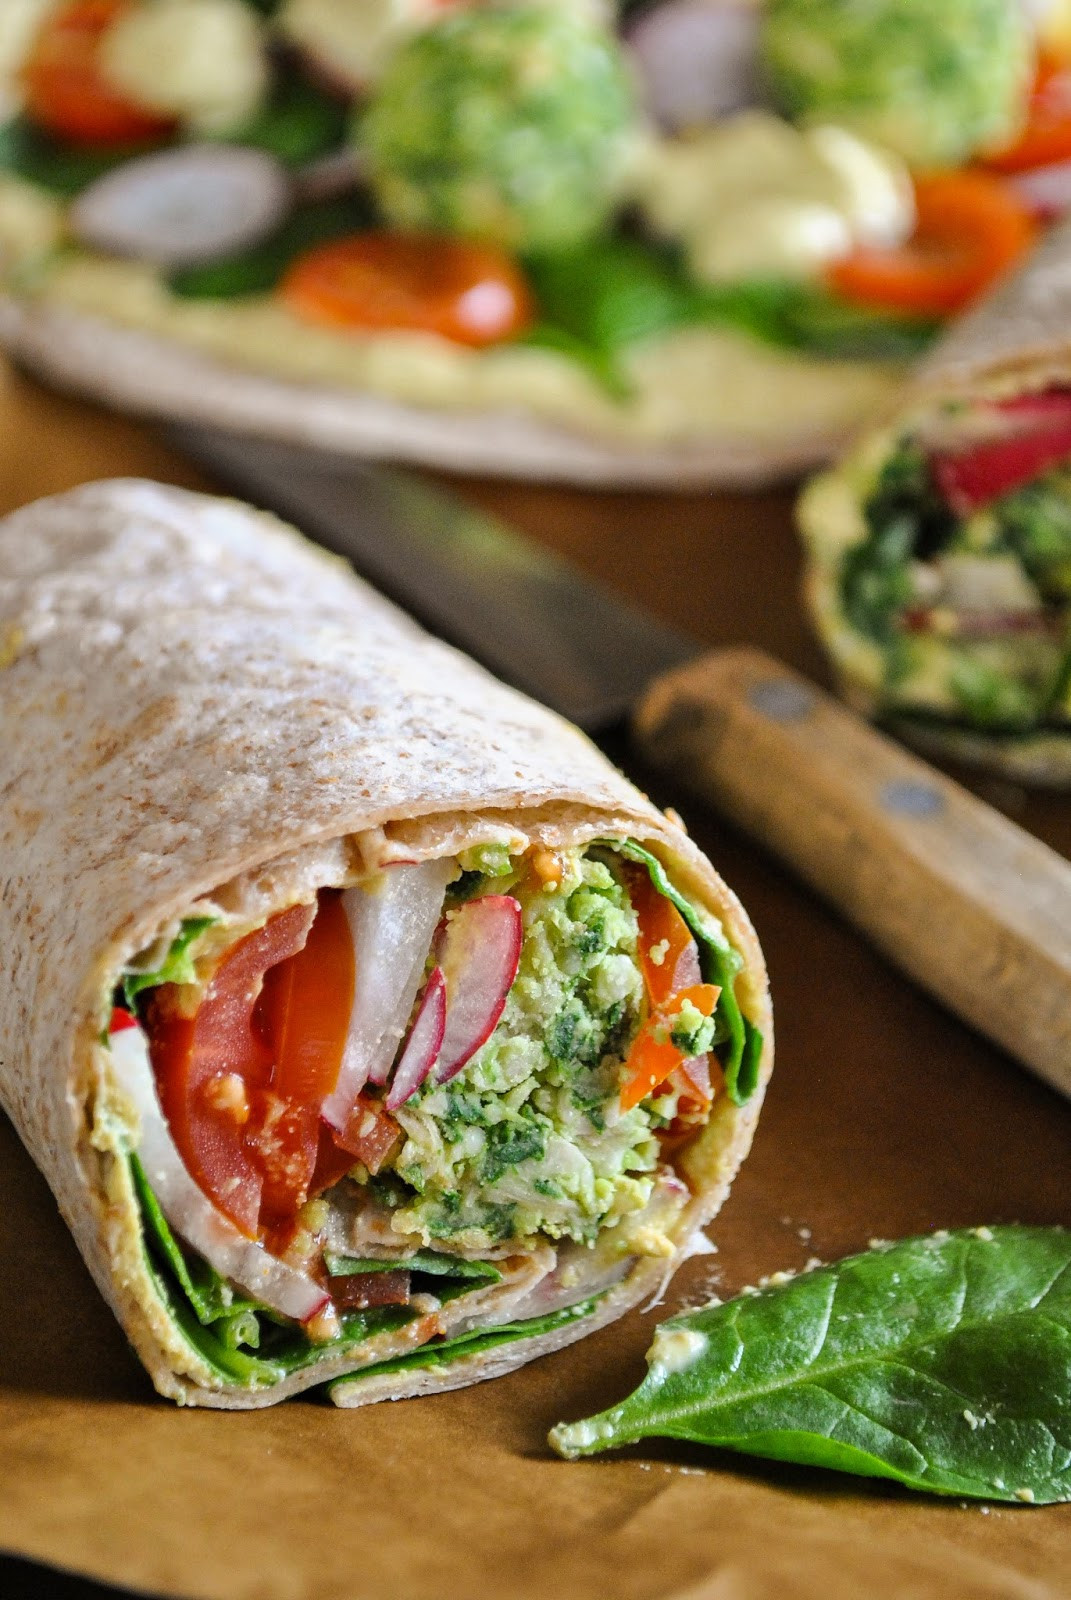 20 Best Ideas Vegan Wraps Recipes - Best Diet and Healthy Recipes Ever ...